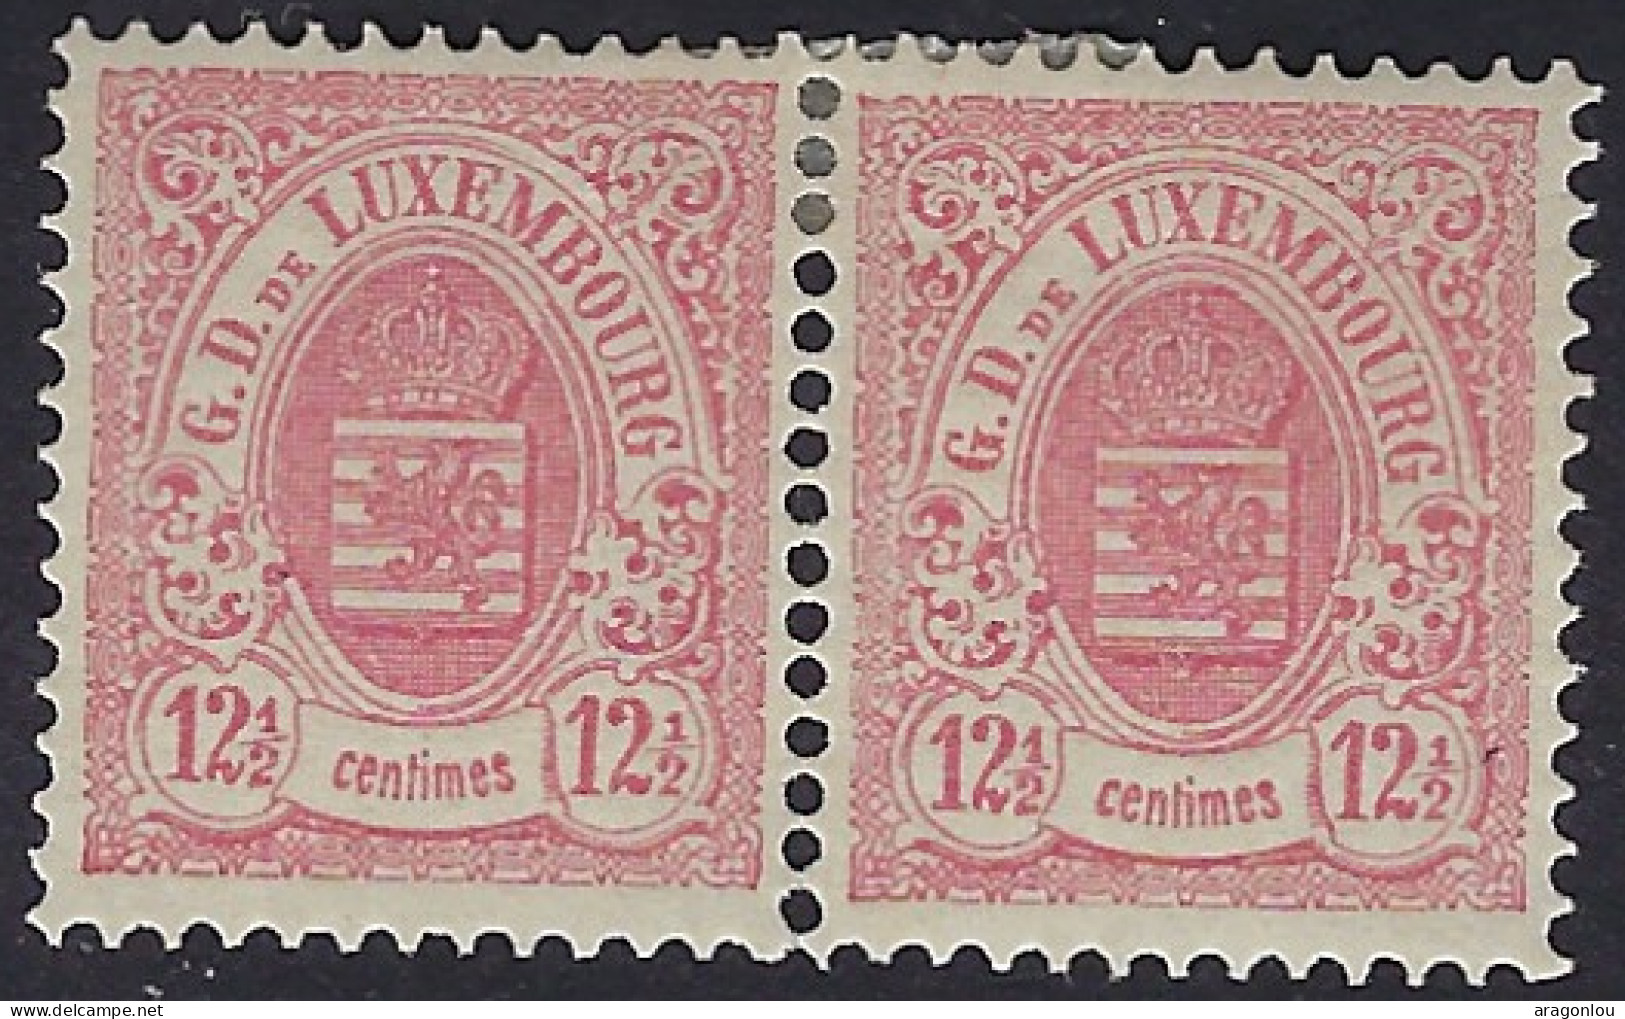 Luxembourg - Luxemburg - Timbres - Armoires 1880    12,5C.    *    1 Paire     Michel 41 D - 1859-1880 Stemmi